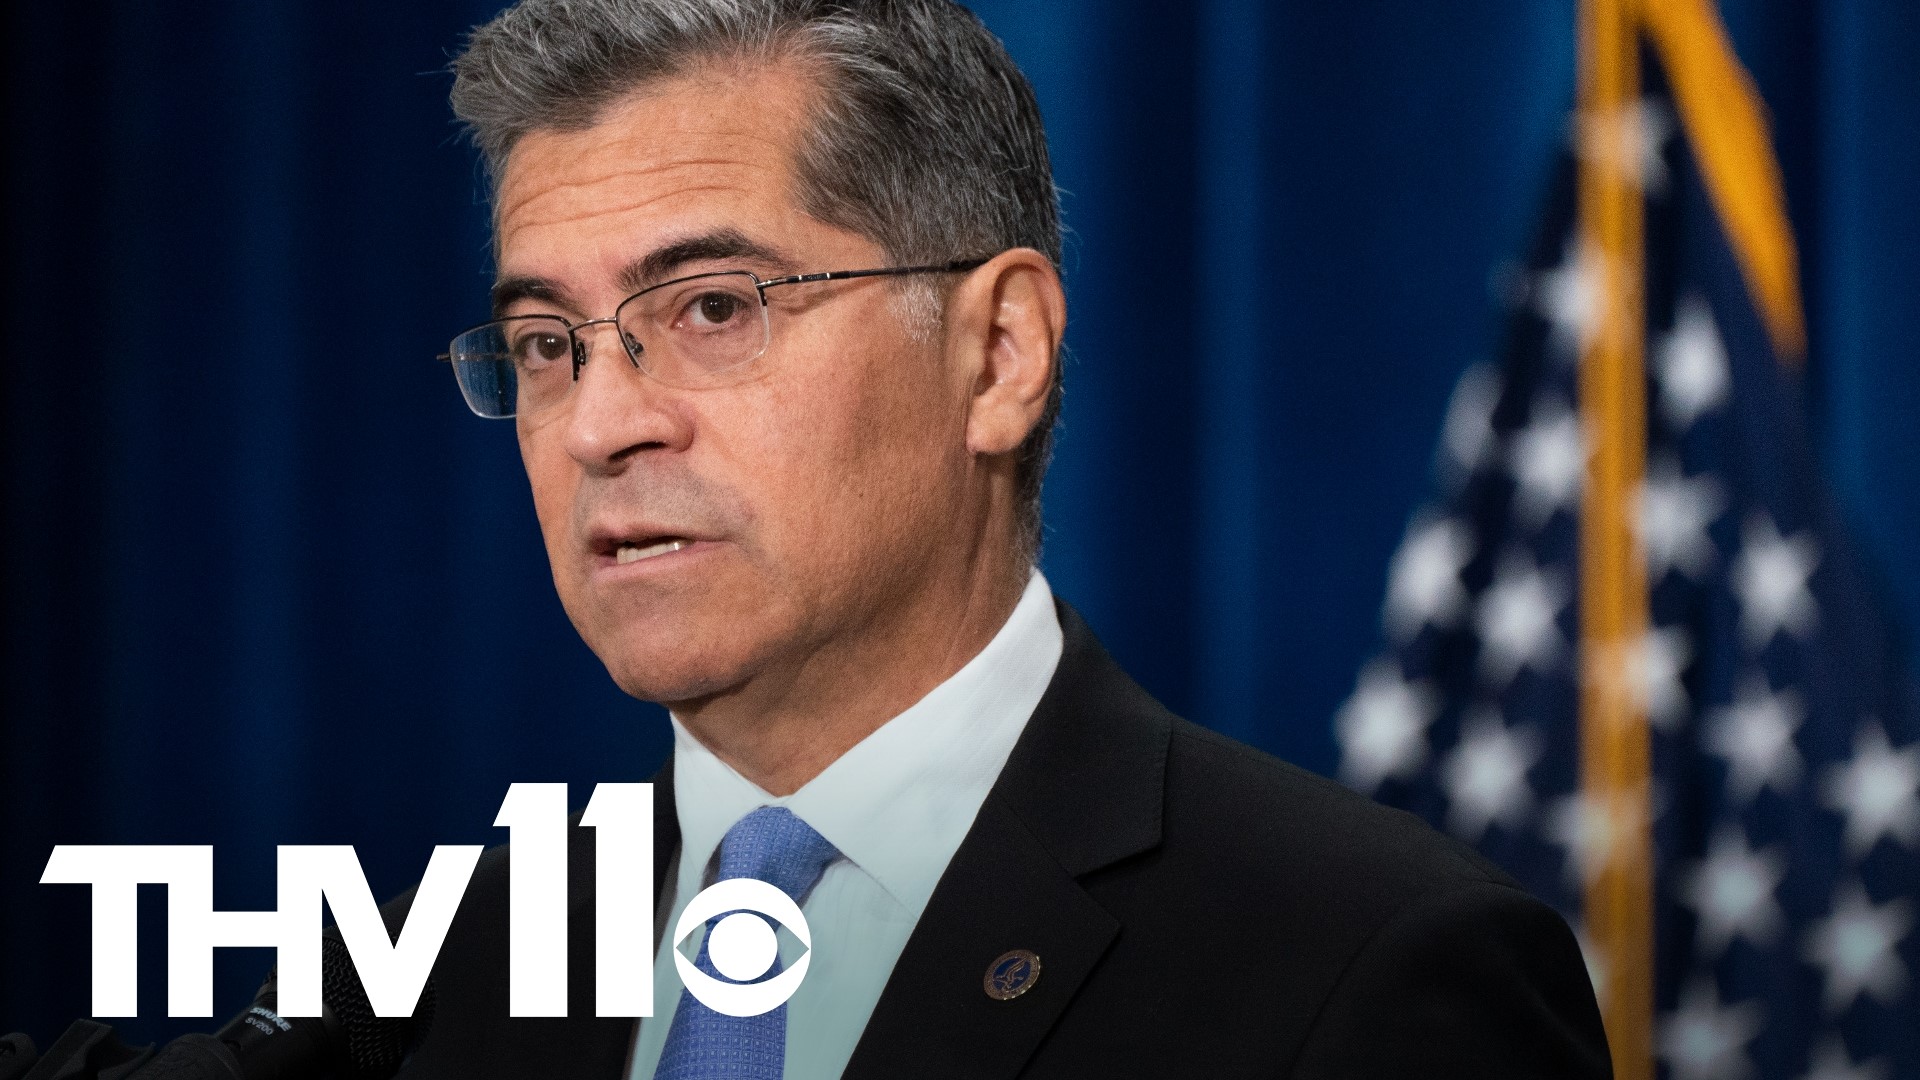 Sec. Becerra called on Arkansas and other states with high child disenrollment to adopt federal strategies to protect kids from losing coverage due to "red tape."